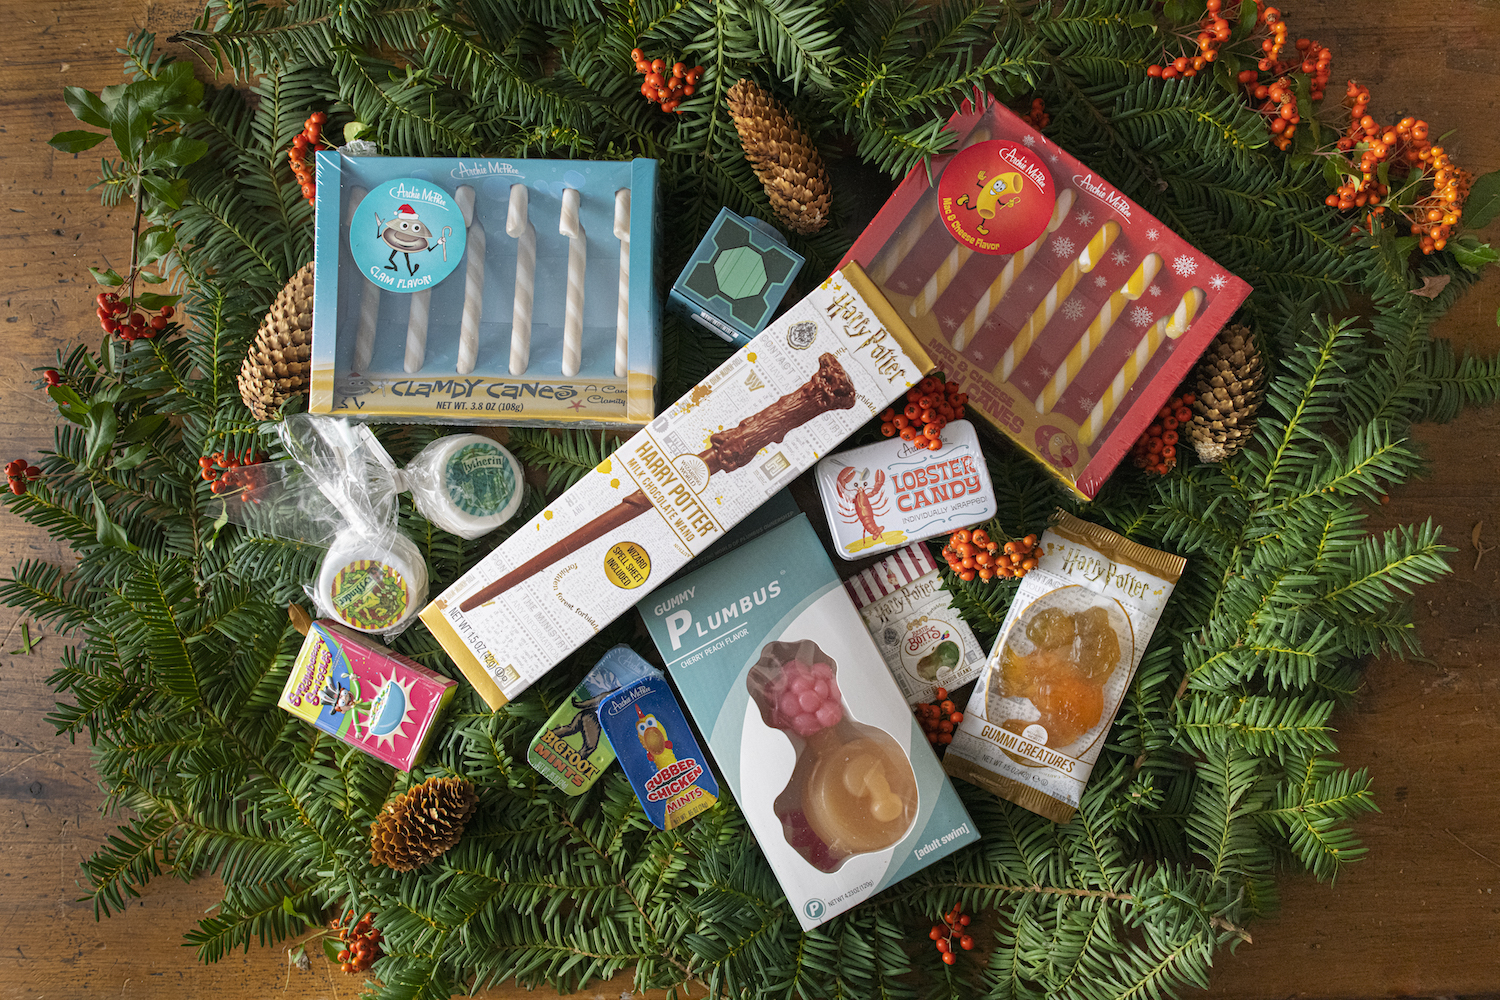 Edible Idaho offers ideas for local holiday stocking stuffers.